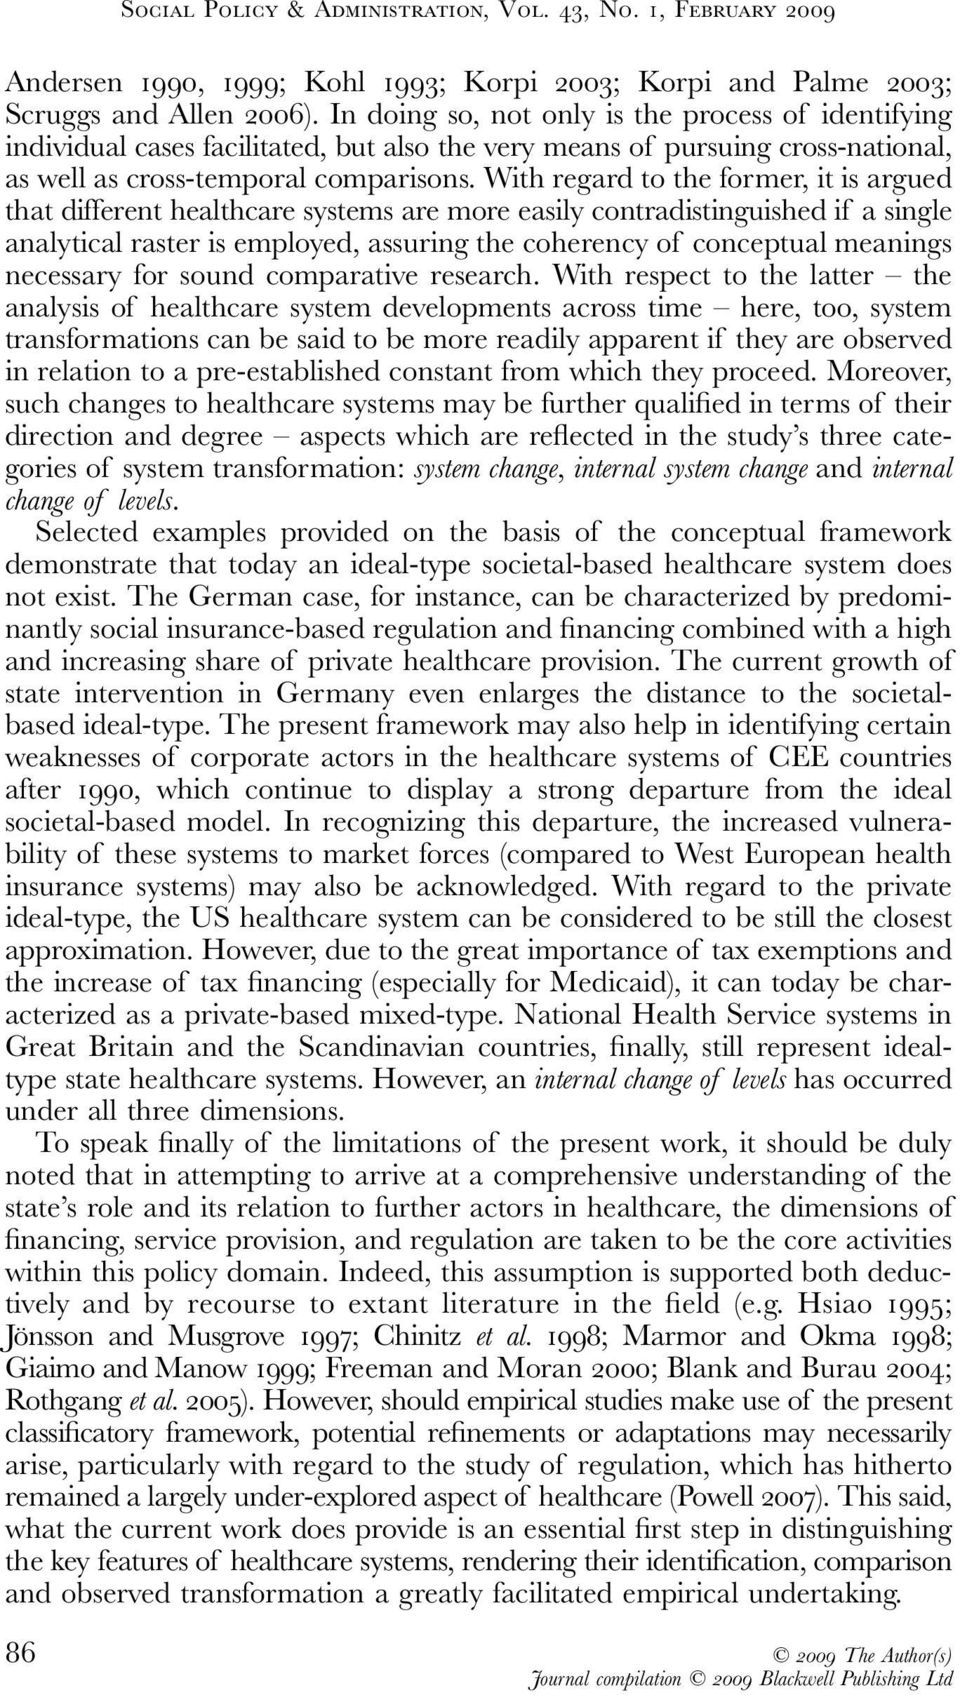 With regard to the former, it is argued that different healthcare systems are more easily contradistinguished if a single analytical raster is employed, assuring the coherency of conceptual meanings